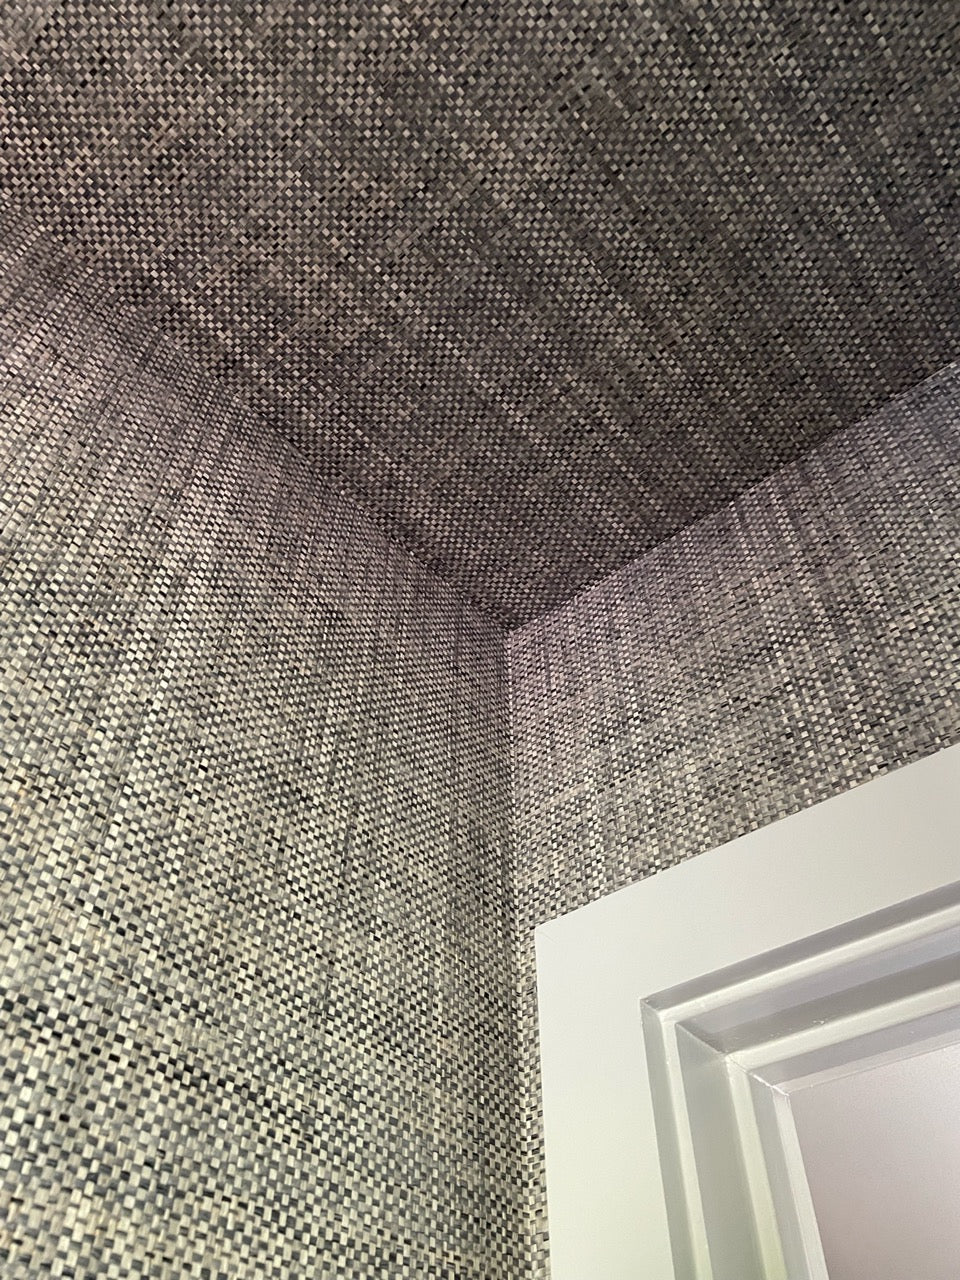 Two walls and the ceiling meet covered in paperweave grasscloth wallpaper